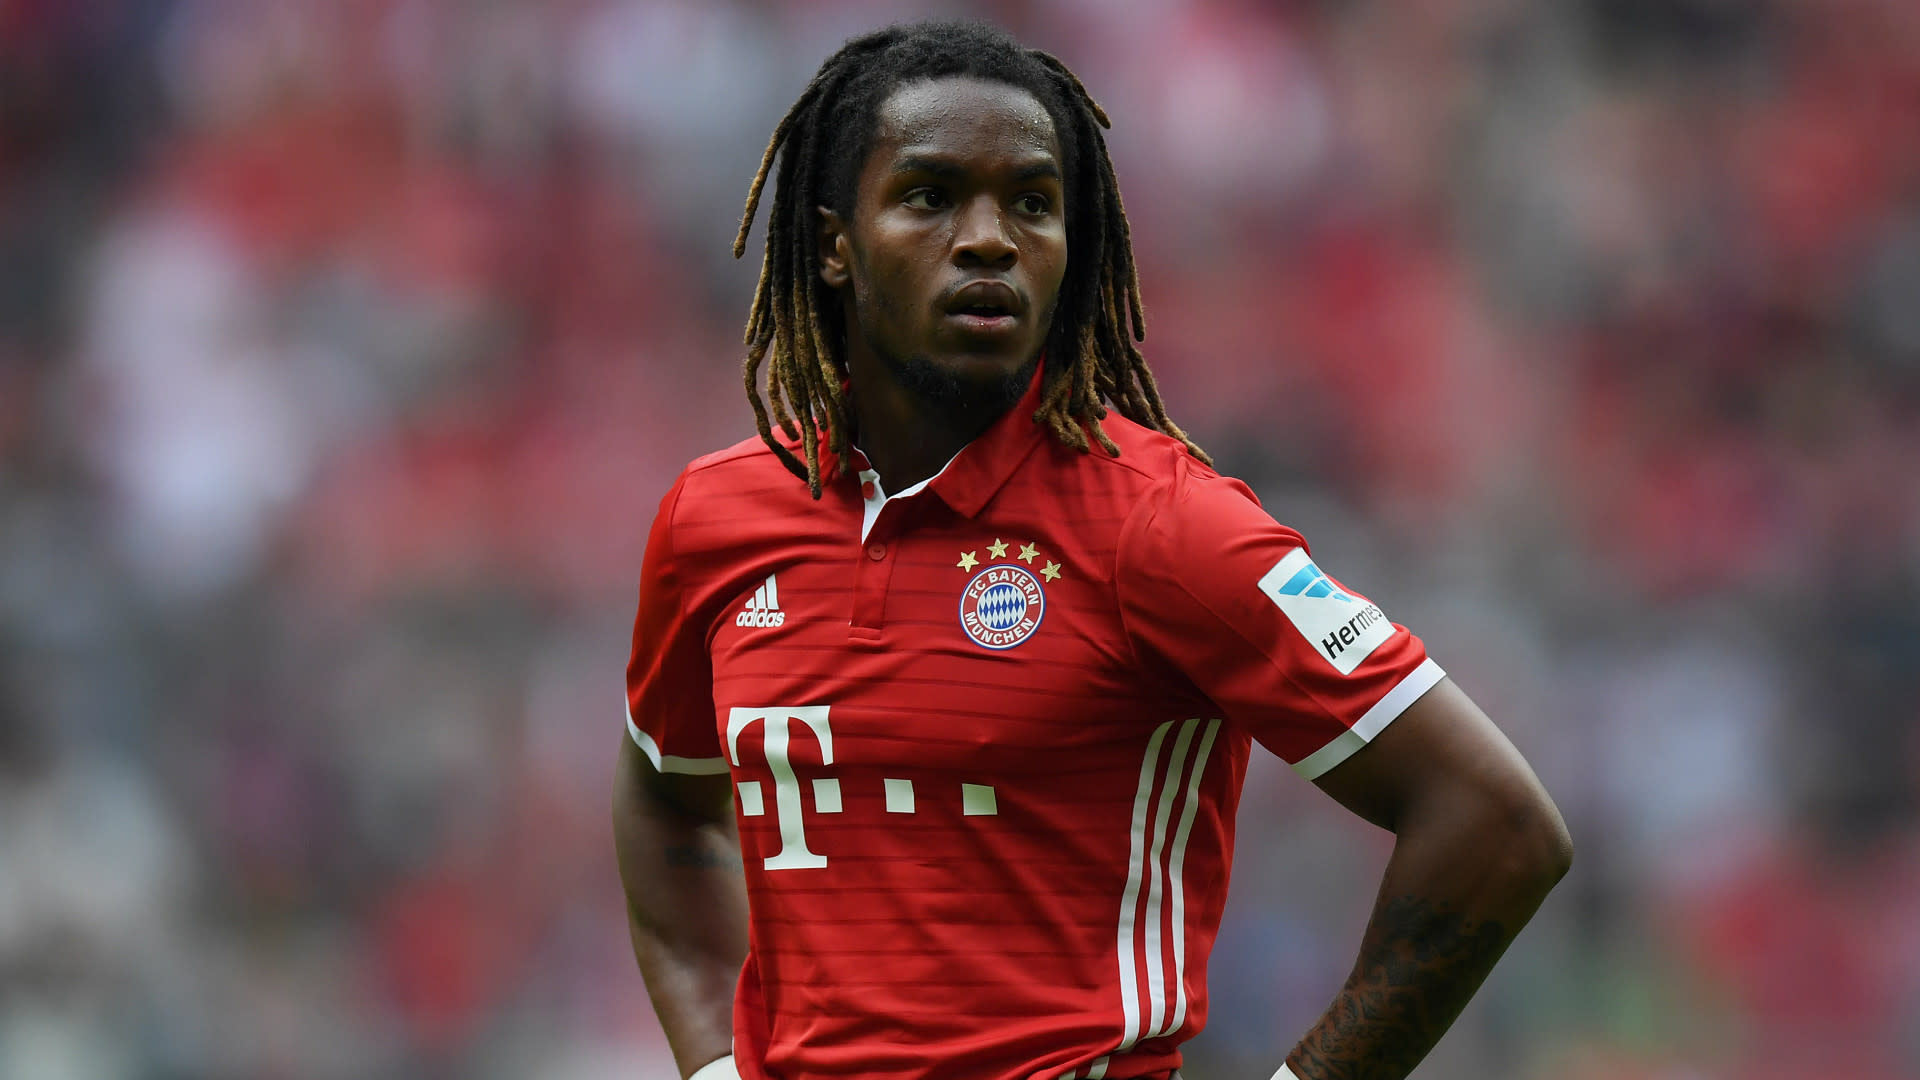 Sanches expects to stay at Bayern Munich